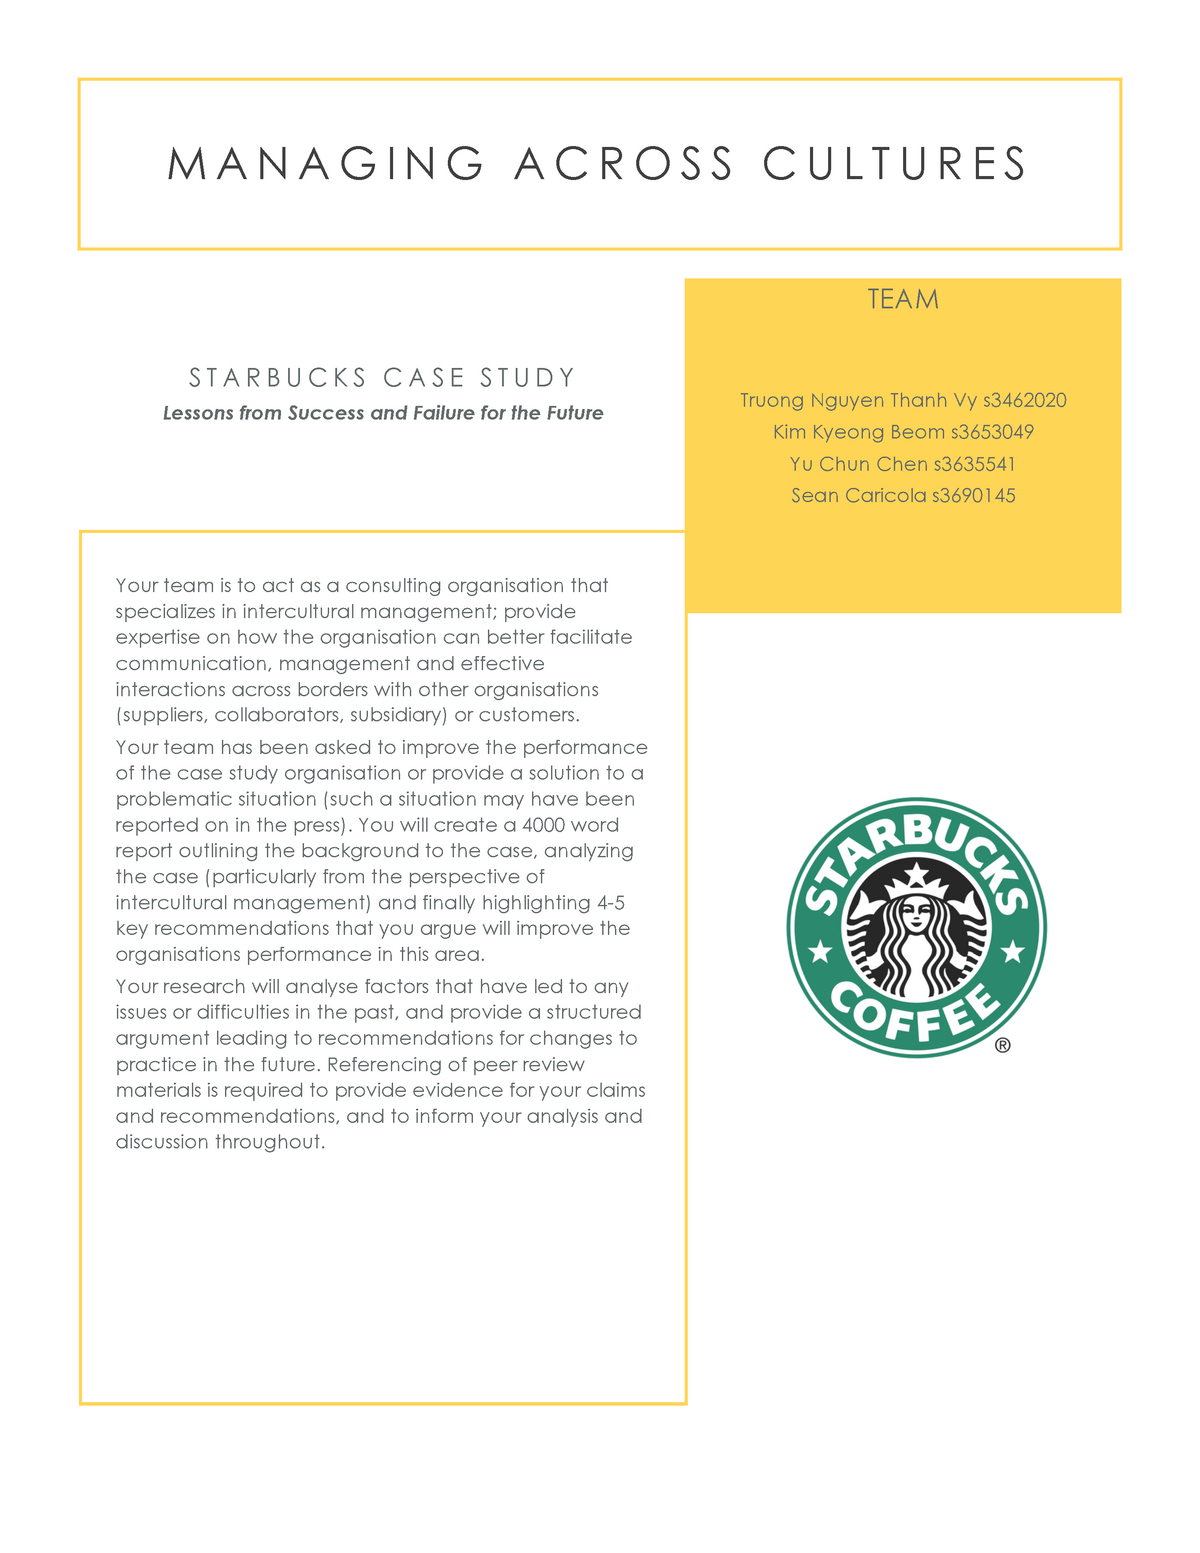 research paper on starbucks case study